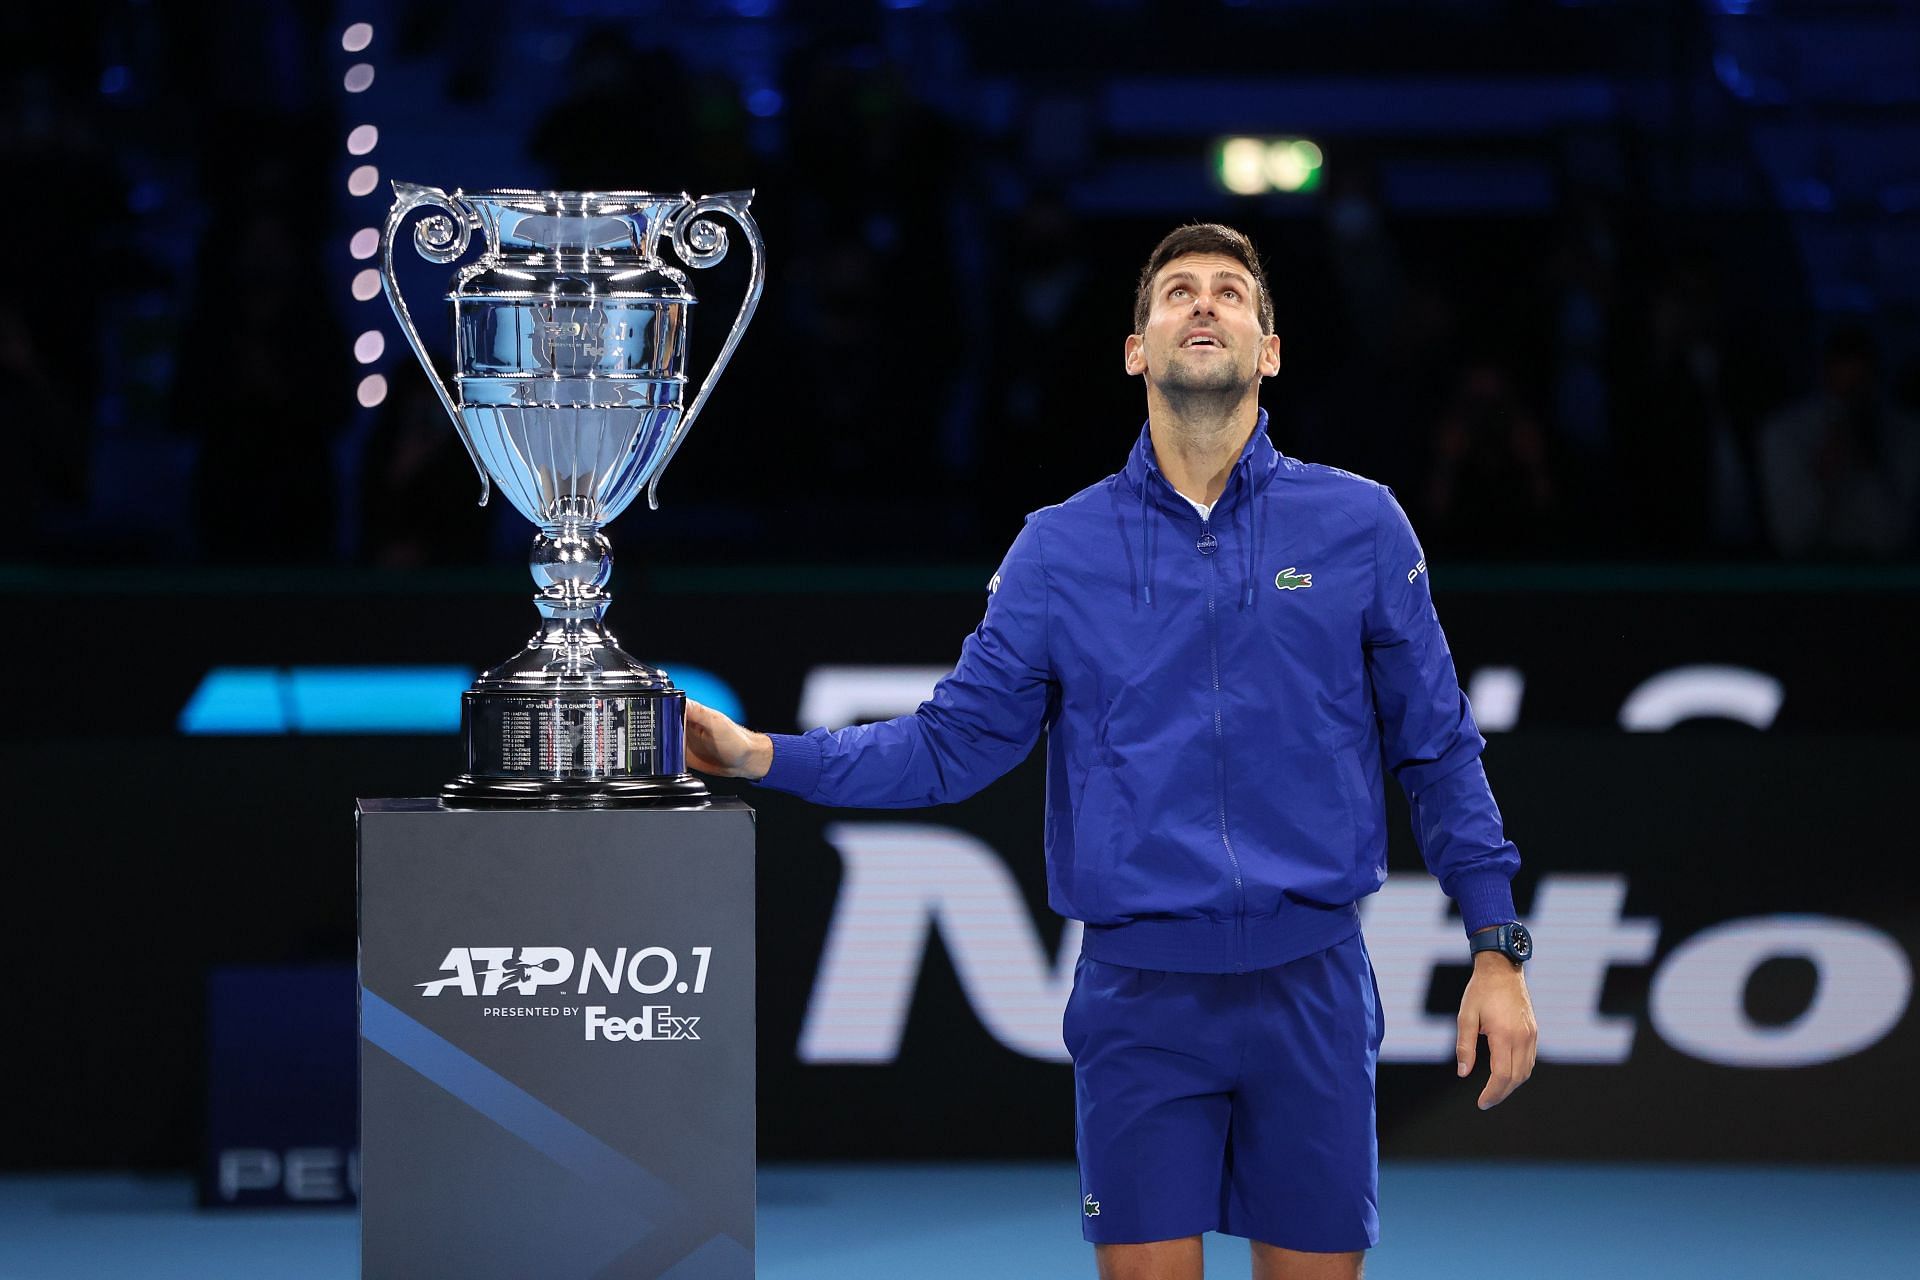 Novak Djokovic after being presented his 7th Year-End No. 1 title at the Nitto ATP World Tour Finals